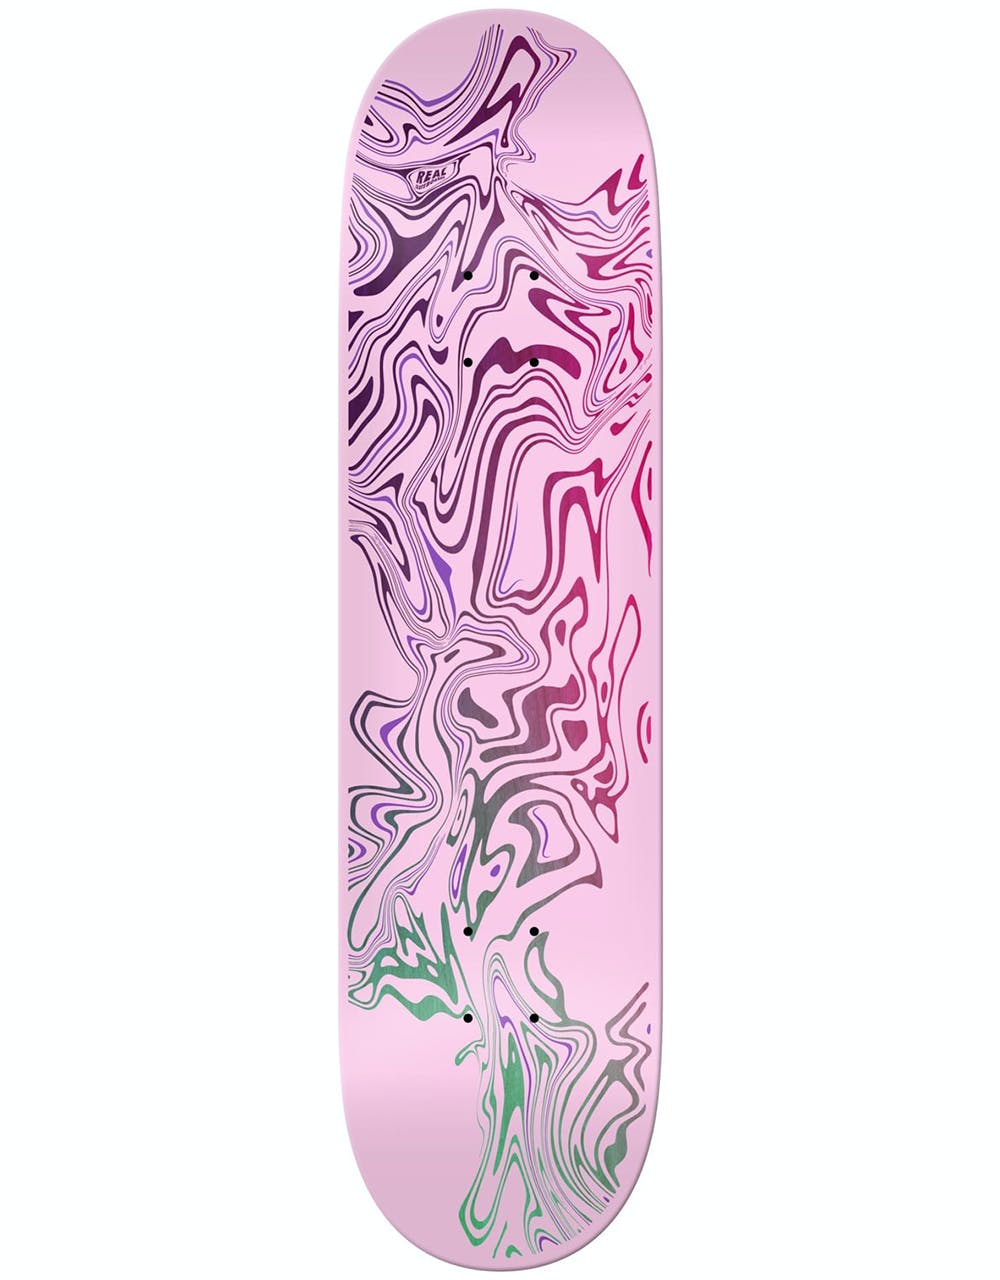 Real Marble Fades Skateboard Deck - 8.5"